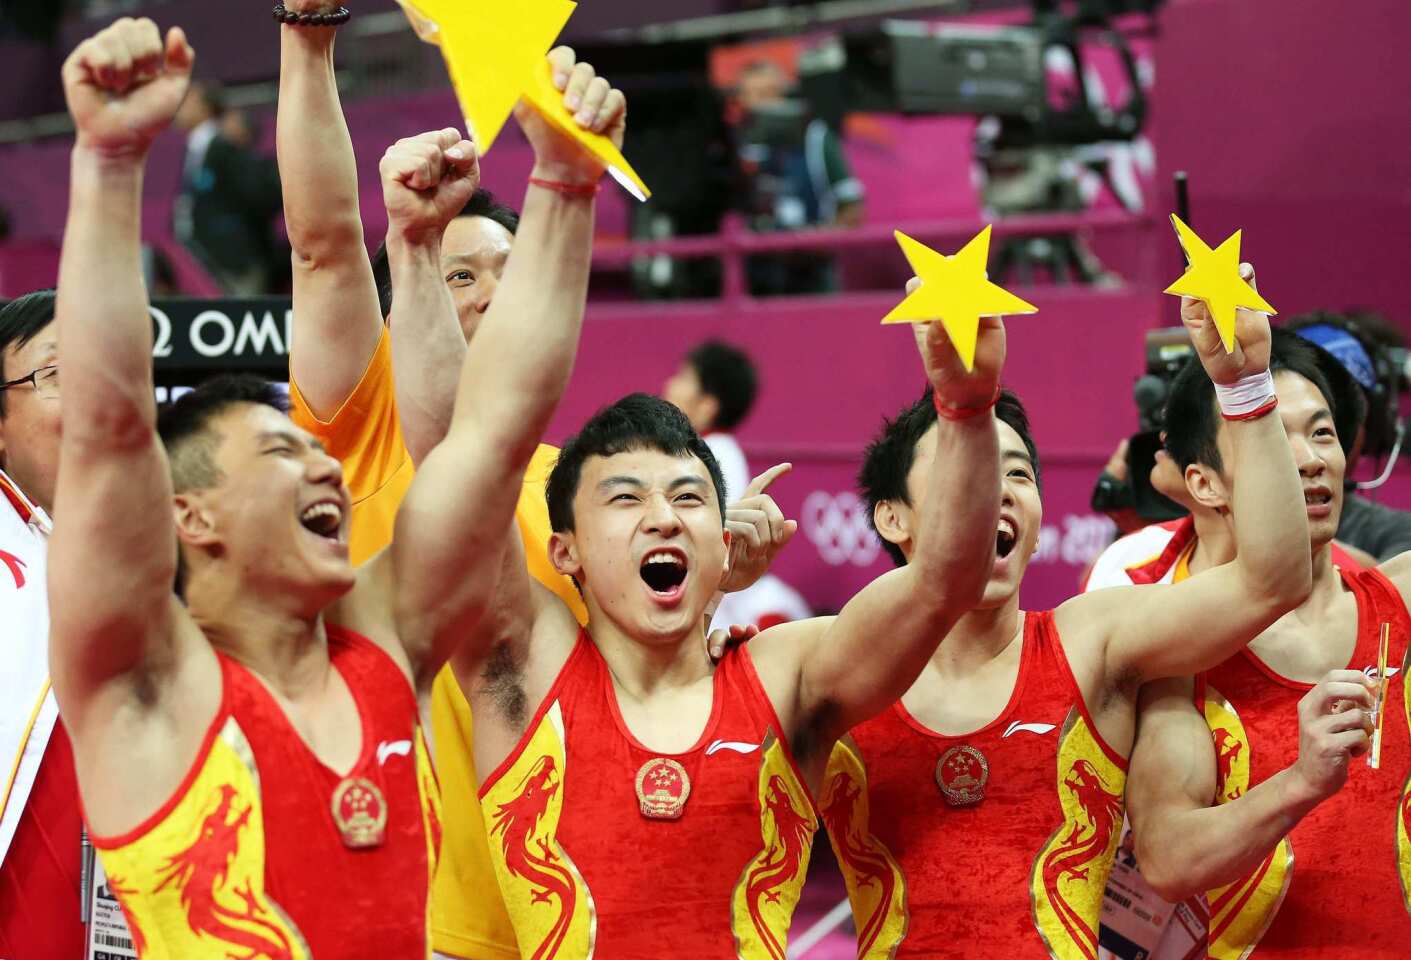 China's men's gymnastics team, from left, Zhe Feng, Weiyang Guo, Yibing Chen, Chenglong Zhang and Kai Zou celebrate winning the gold medal in the men's gymnastic team competition.